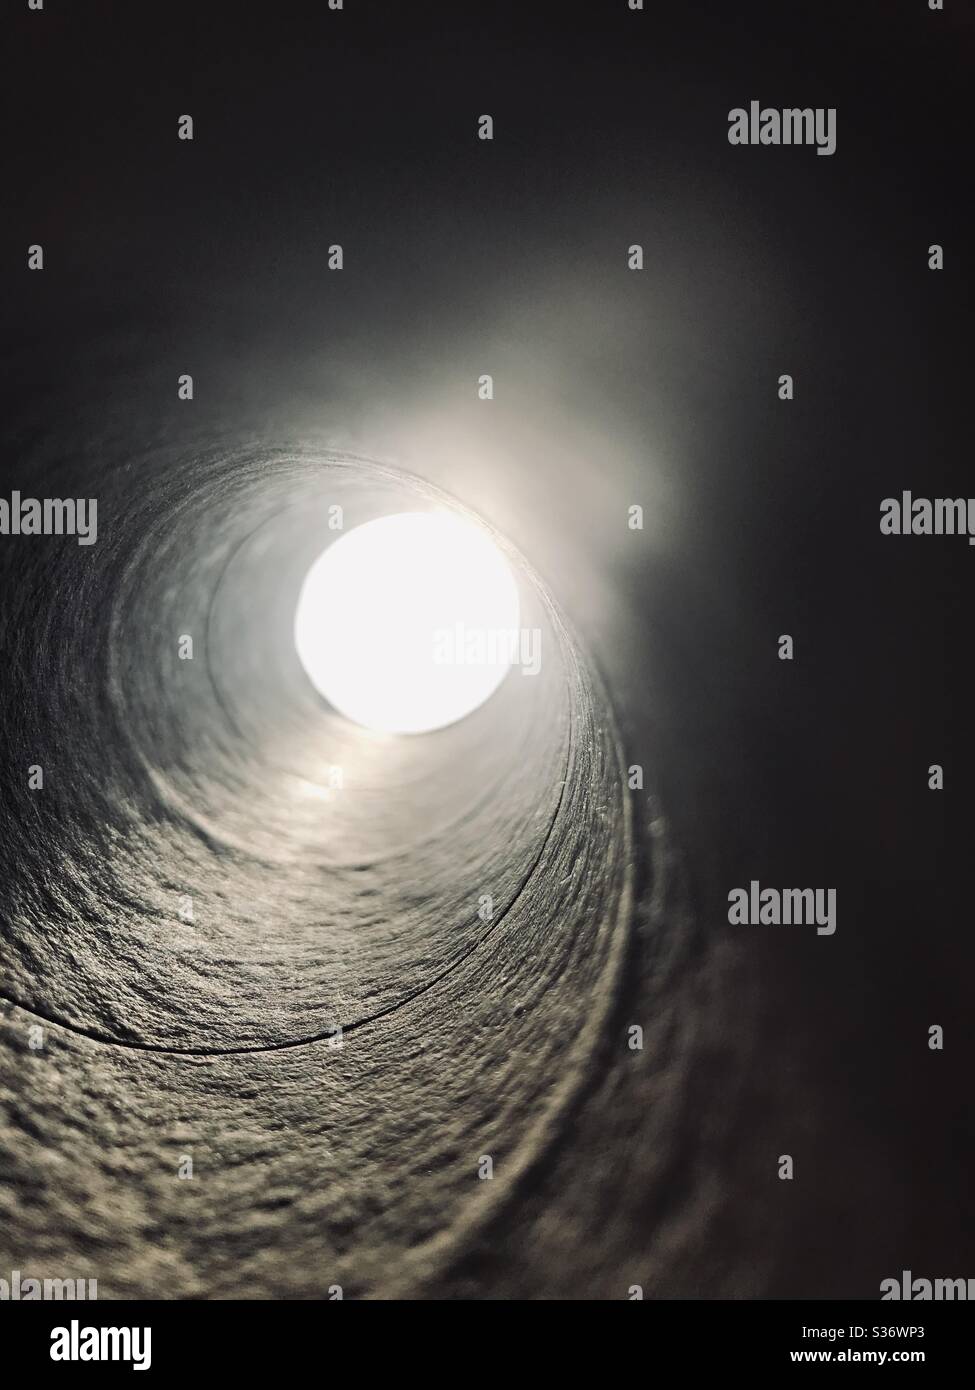 Dramatic Sun view through a spiral empty tissue roll  , imagination for ray of hope Stock Photo